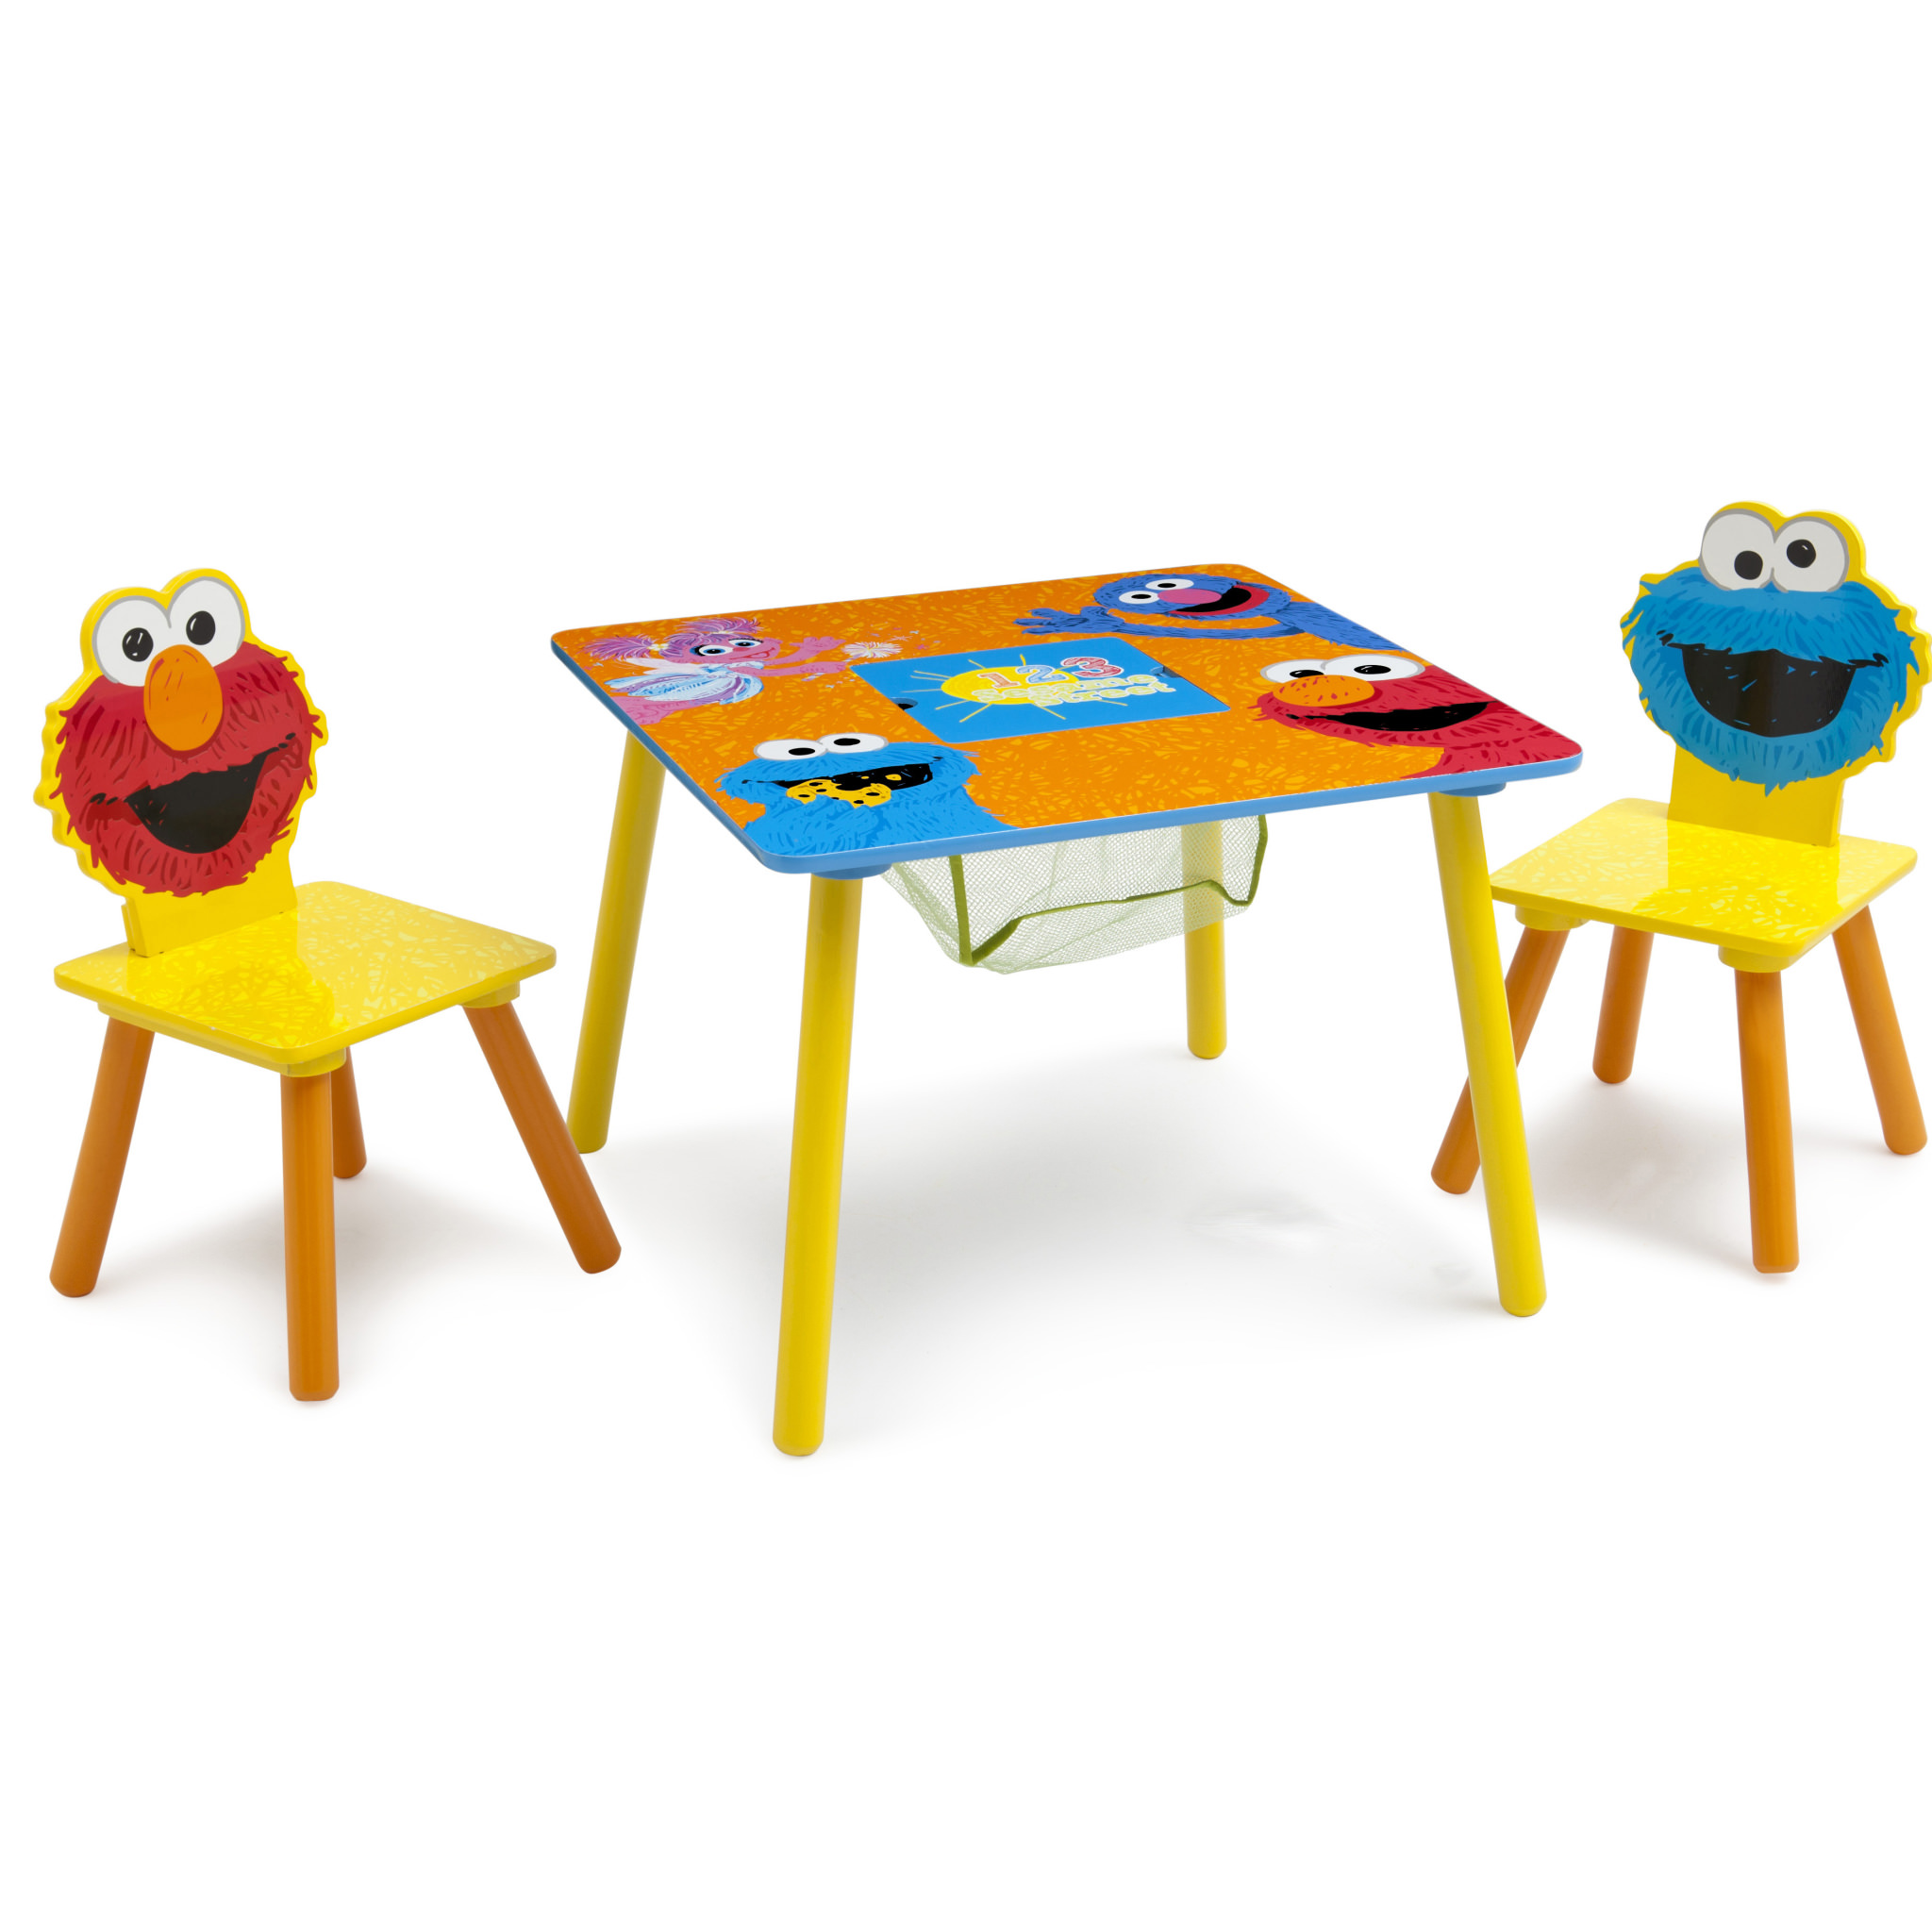 Sesame Street Wood Kids Storage Table and Chairs Set by Delta Children, Greenguard Gold Certified - image 1 of 8